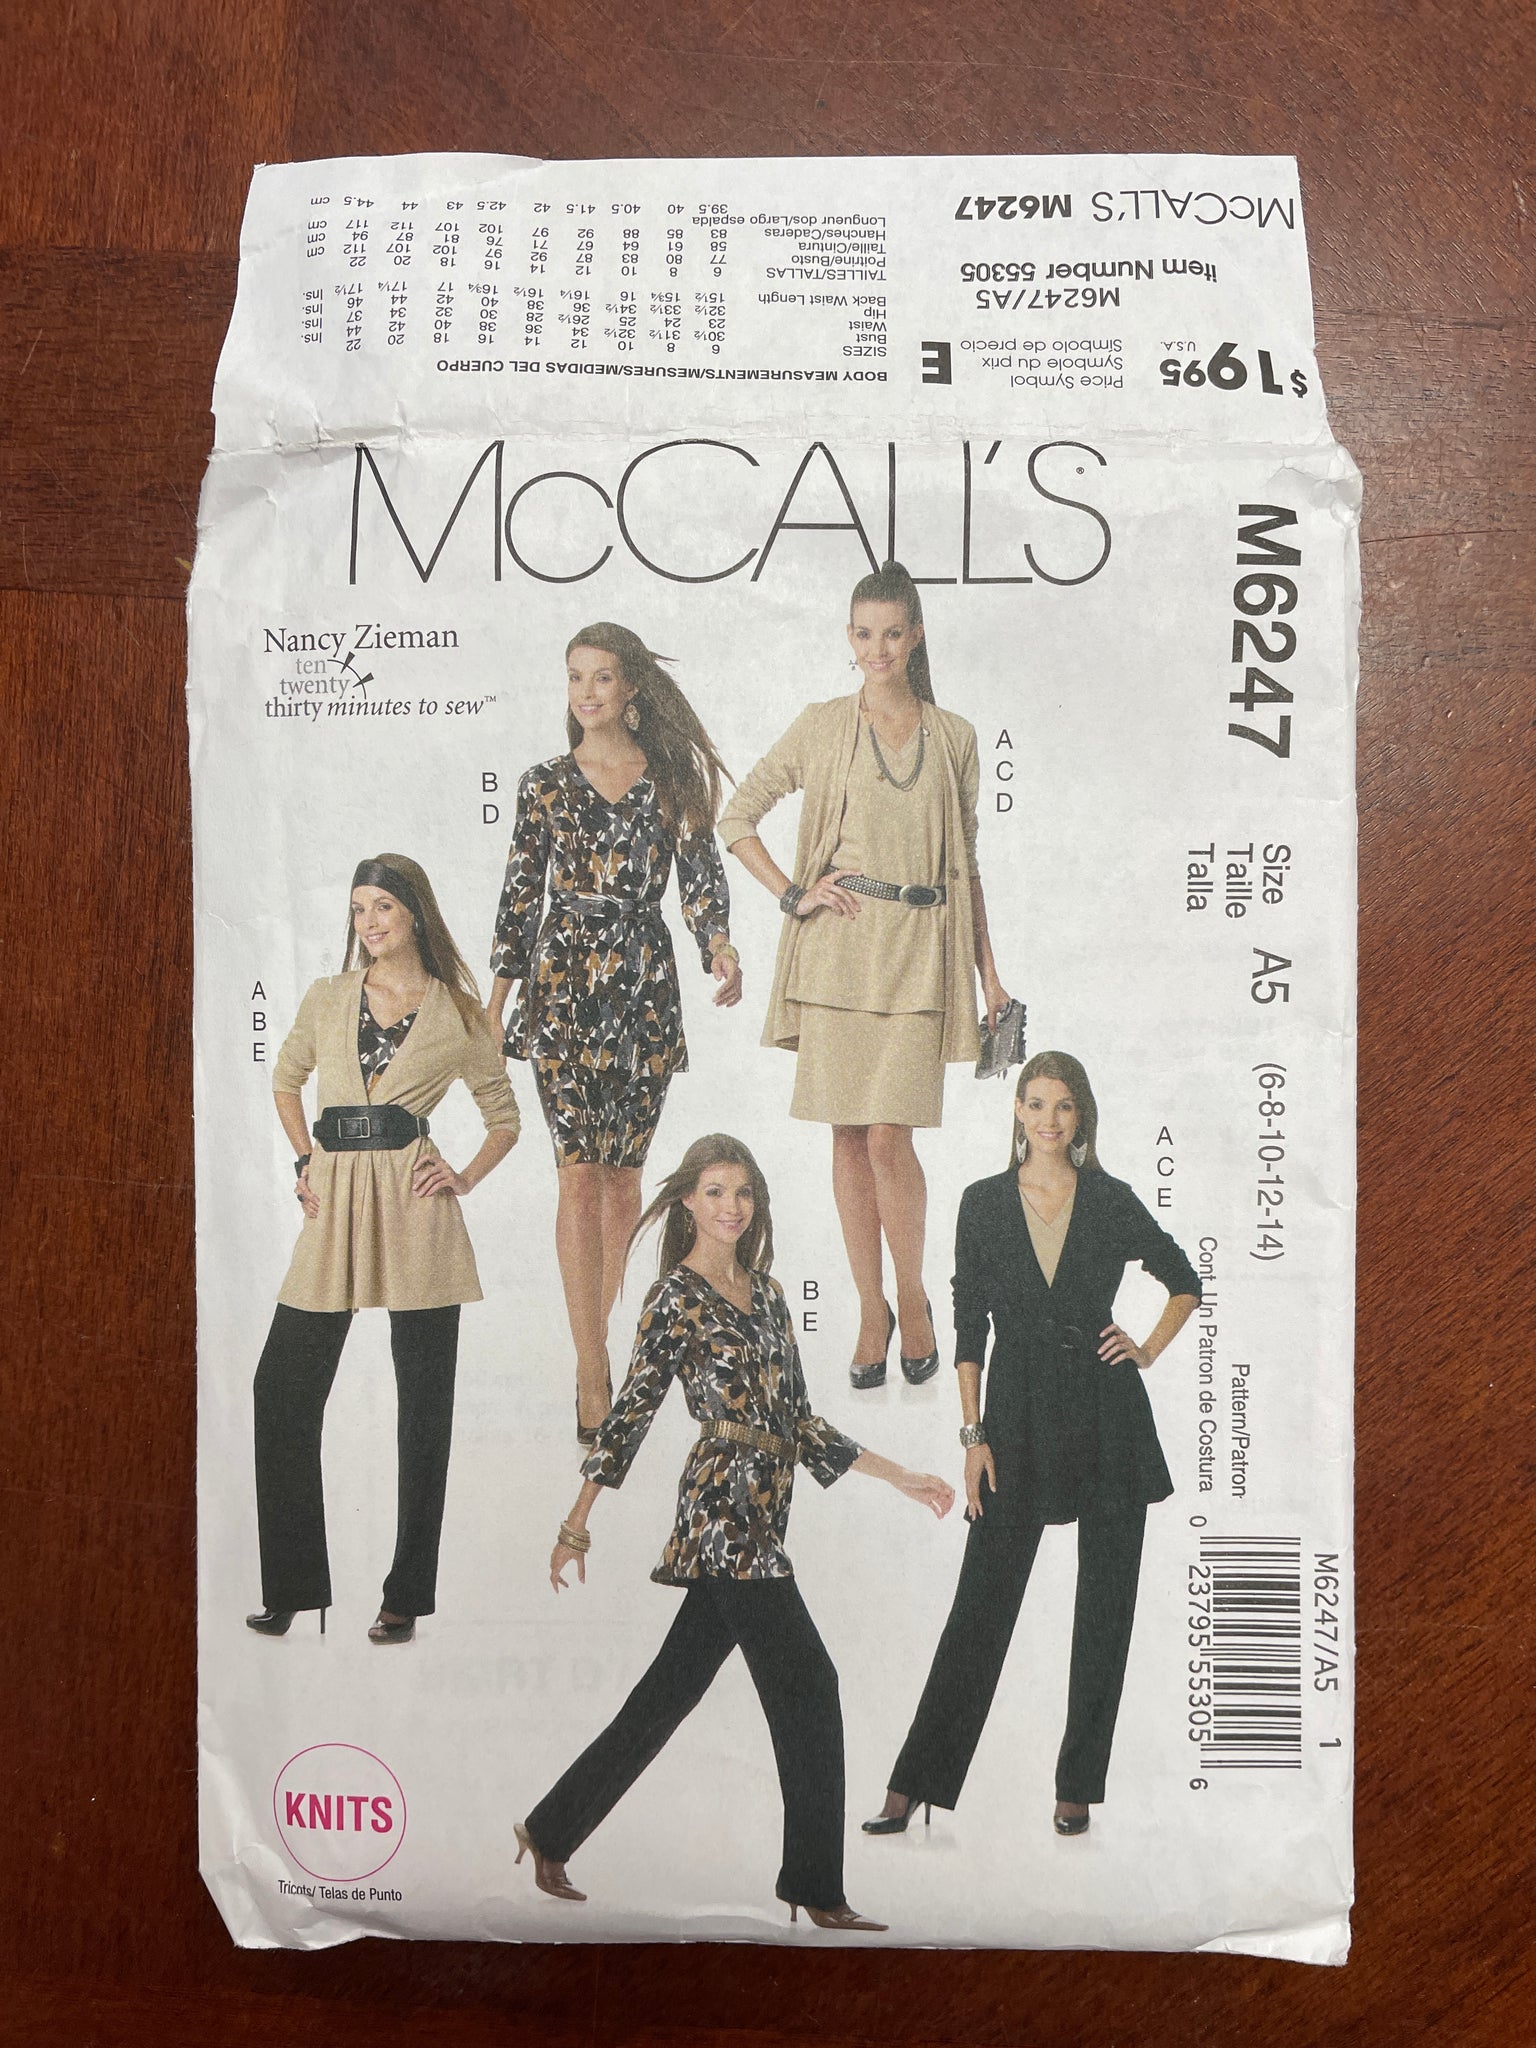 2010 McCall's 6247 Pattern - Jacket, Tops, Sash, Skirt and Pants FACTORY FOLDED